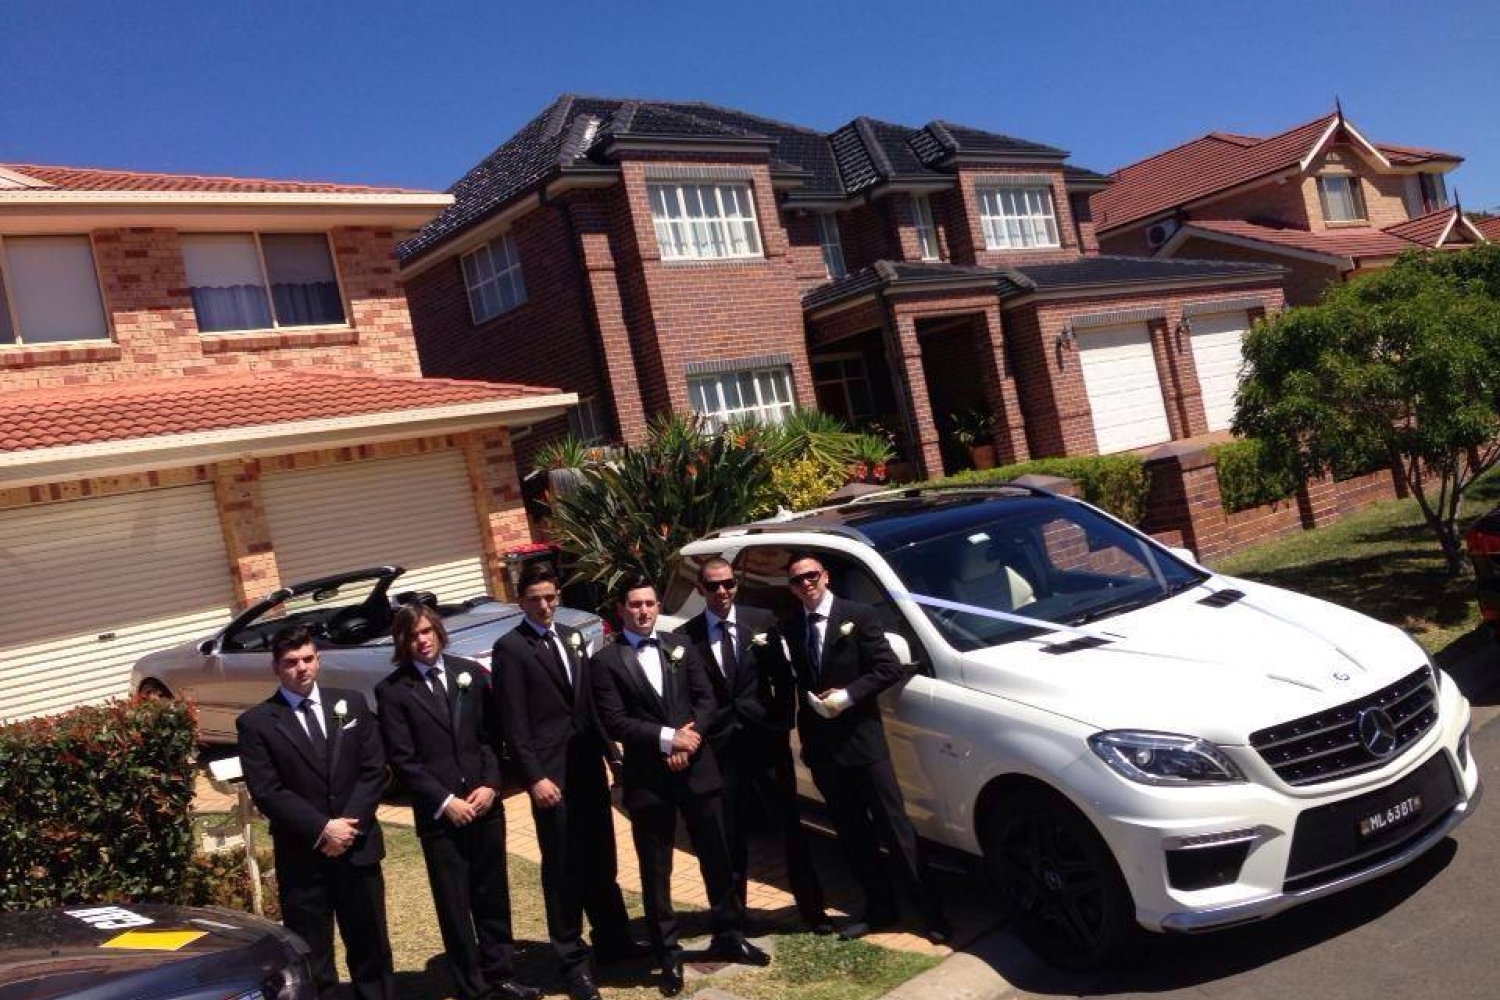 Our Mercedes ML63 AMG with Jack and his groomsmen